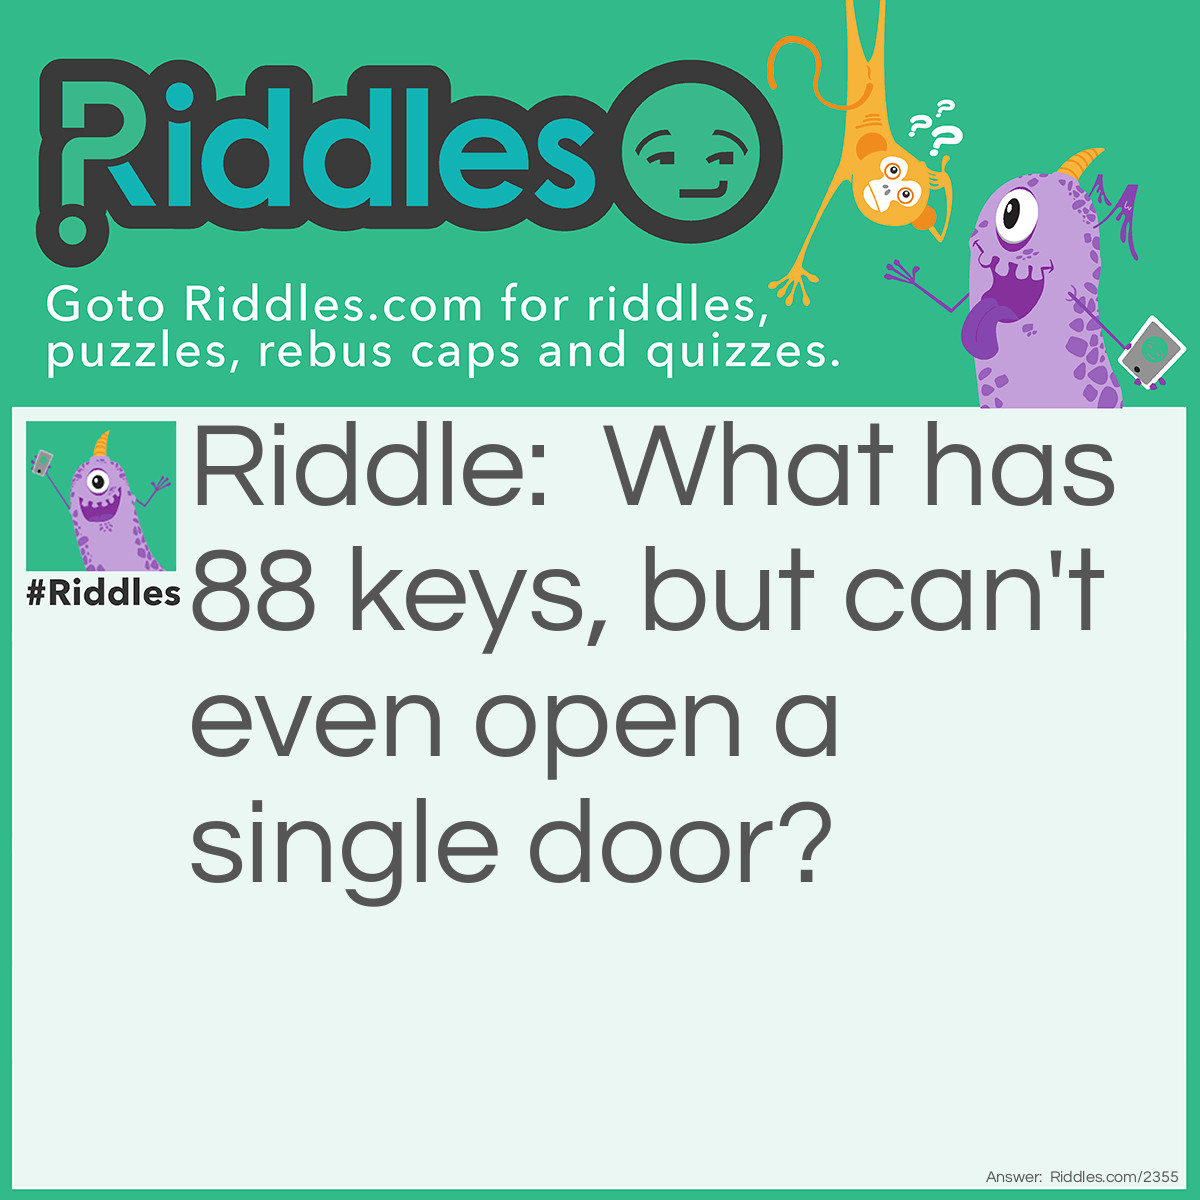 Riddle: What has many keys, but can't even open a single door? Answer: A piano.